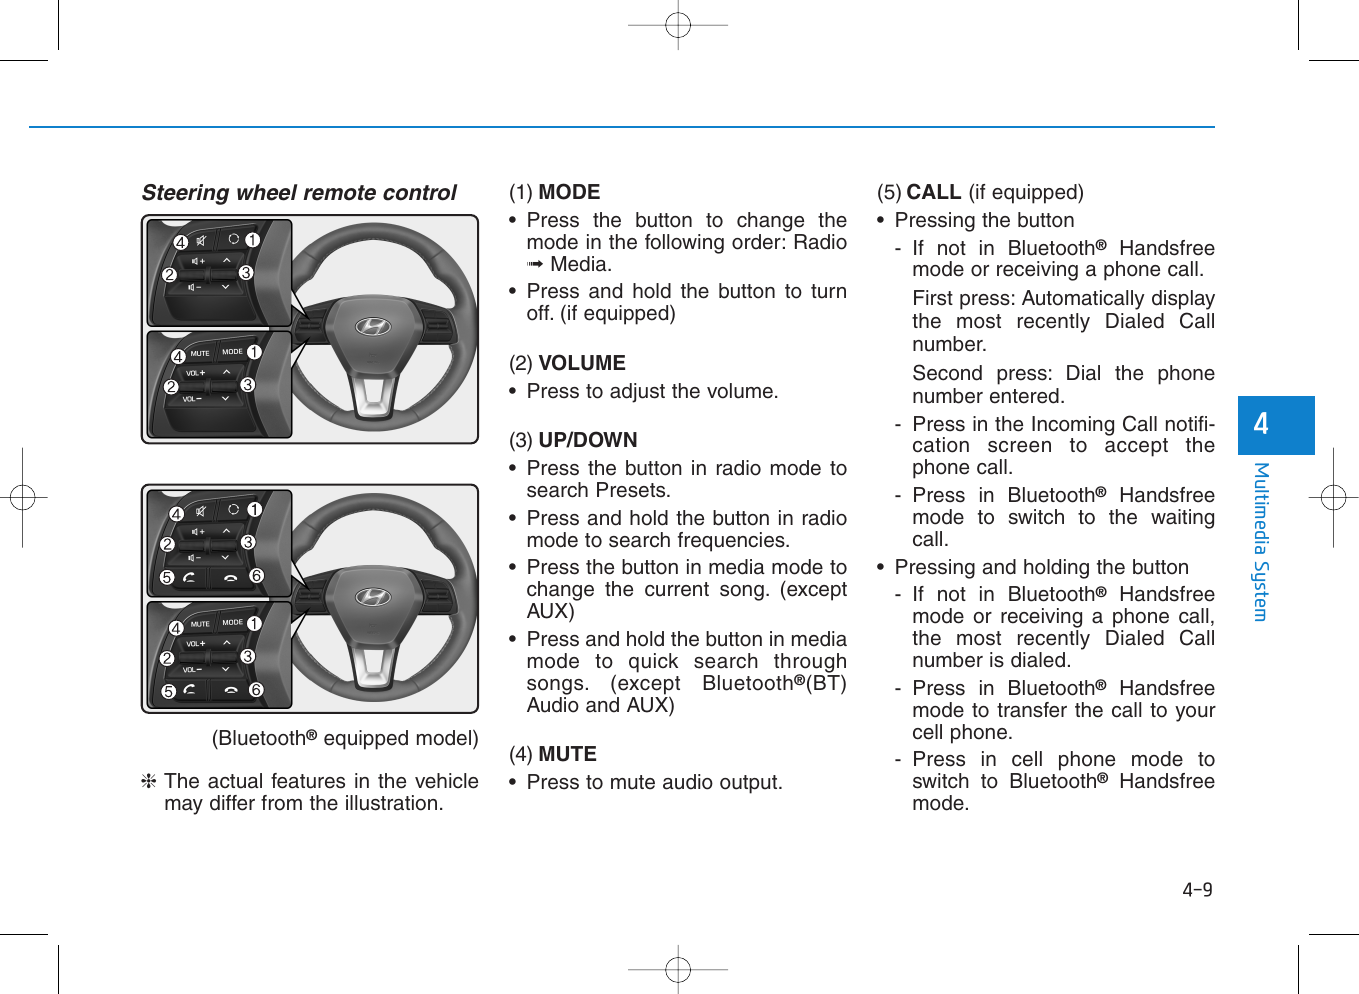 4-9Multimedia System4Steering wheel remote control(Bluetooth®equipped model)❈The actual features in the vehiclemay differ from the illustration.(1) MODE• Press the button to change themode in the following order: Radio➟Media.• Press and hold the button to turnoff. (if equipped)(2) VOLUME• Press to adjust the volume.(3) UP/DOWN• Press the button in radio mode tosearch Presets.• Press and hold the button in radiomode to search frequencies.• Press the button in media mode tochange the current song. (exceptAUX)• Press and hold the button in mediamode to quick search throughsongs. (except Bluetooth®(BT)Audio and AUX)(4) MUTE• Press to mute audio output.(5) CALL (if equipped)• Pressing the button- If not in Bluetooth®Handsfreemode or receiving a phone call.First press: Automatically displaythe most recently Dialed Callnumber.Second press: Dial the phonenumber entered.- Press in the Incoming Call notifi-cation screen to accept thephone call.- Press in Bluetooth®Handsfreemode to switch to the waitingcall.• Pressing and holding the button- If not in Bluetooth®Handsfreemode or receiving a phone call,the most recently Dialed Callnumber is dialed.- Press in Bluetooth®Handsfreemode to transfer the call to yourcell phone.- Press in cell phone mode toswitch to Bluetooth®Handsfreemode.